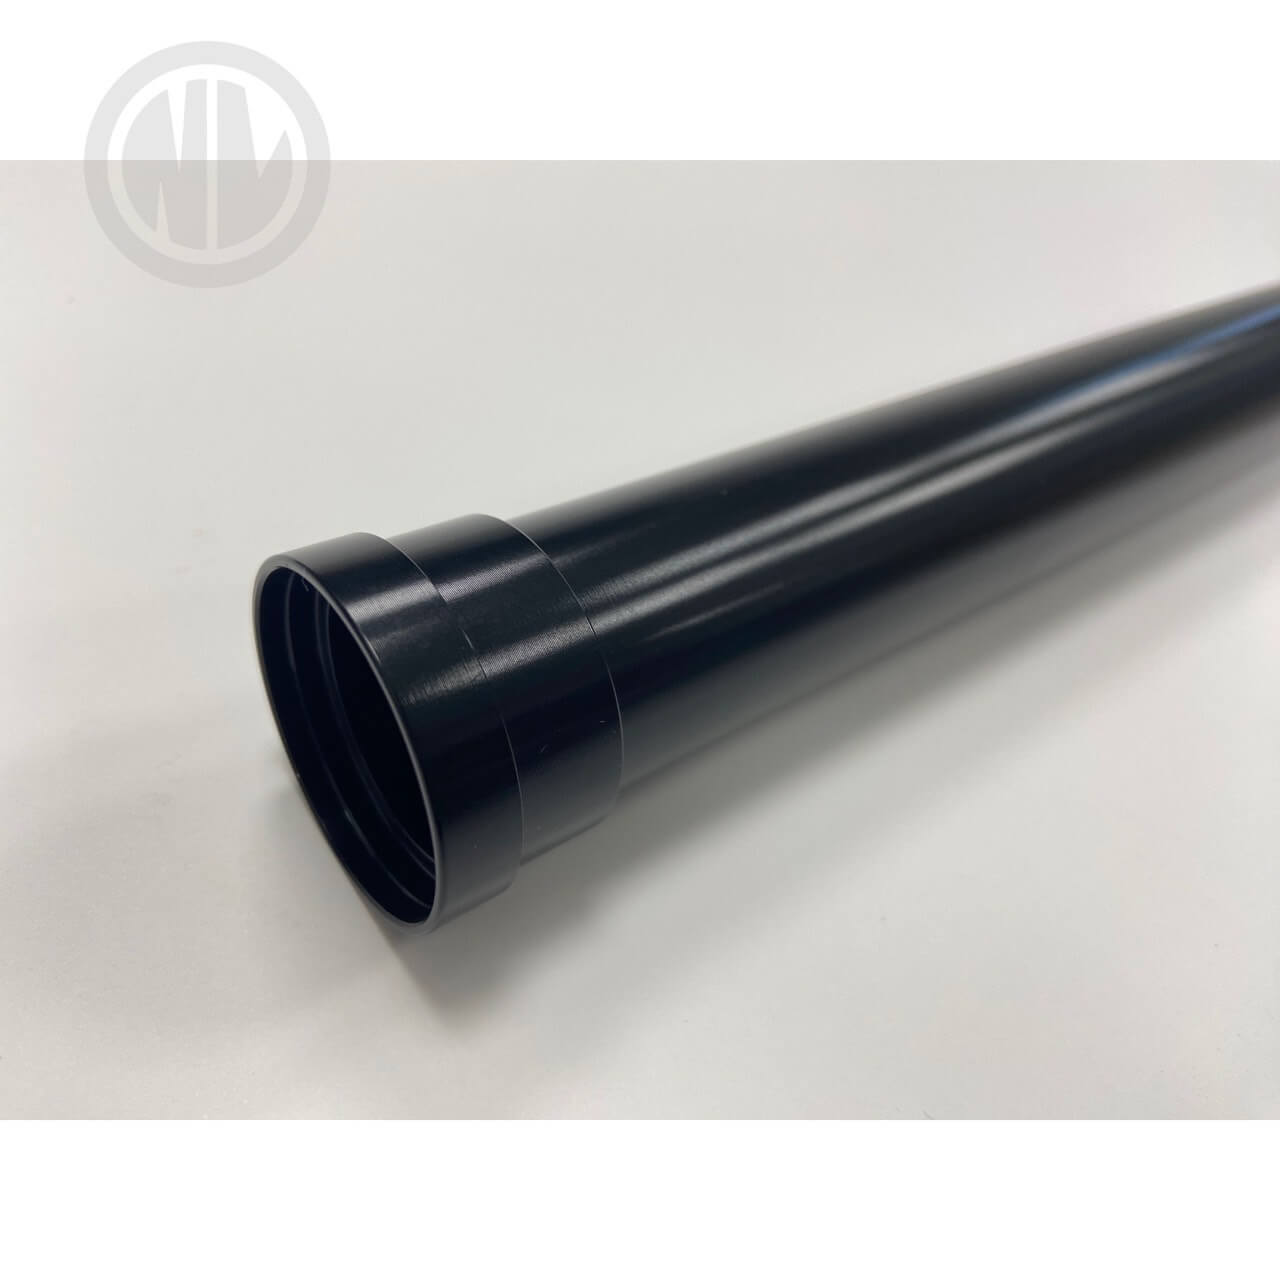 Suspension Outer tube SOT-002